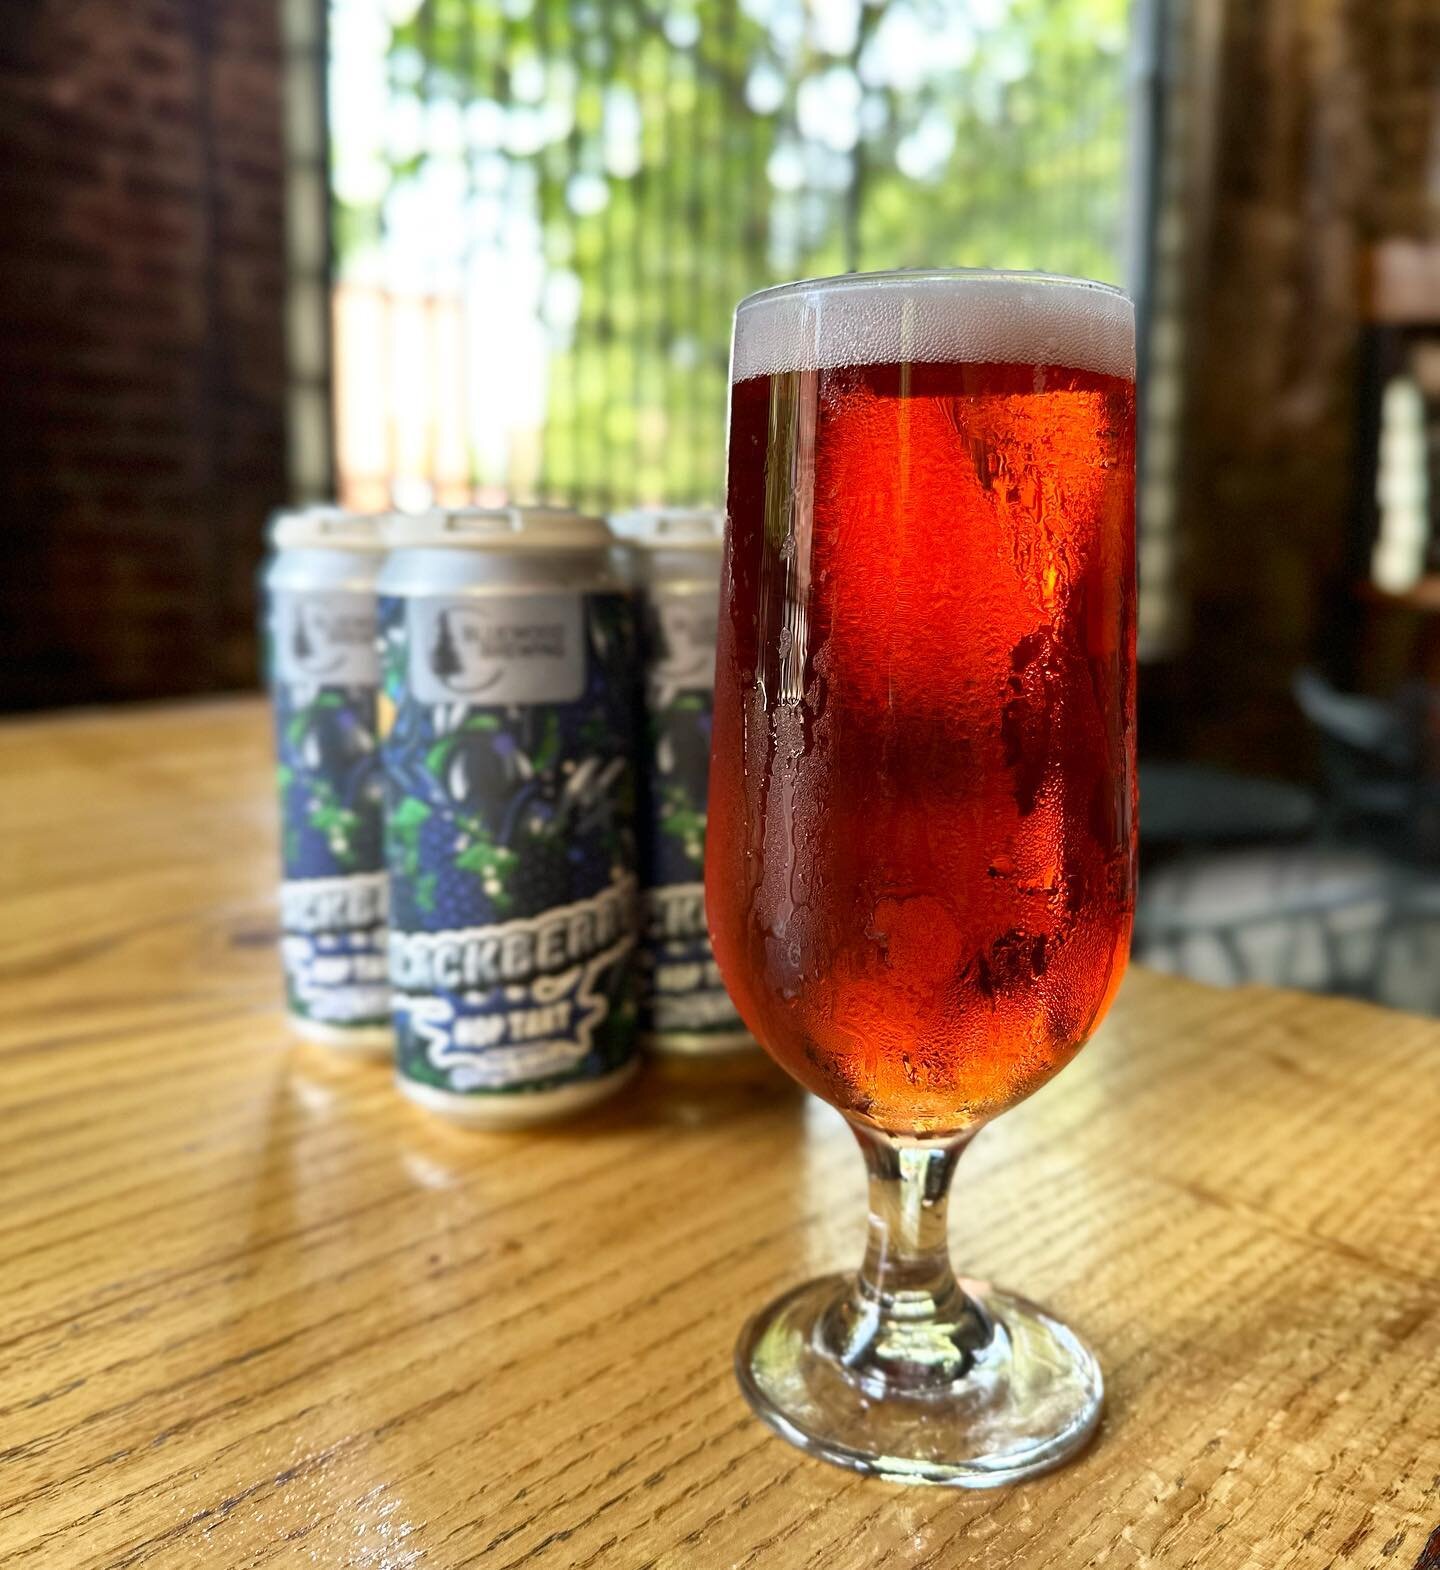 BLACKBERRY HOP TART 💜

Our favorite fruited sour is back in blackberry! We add a little lactose to the kettle and flavor it with graham cracker for a light treat reminiscent of blackberry cobbler 🥧 perfect on the patio on a hot day. 

Available on 